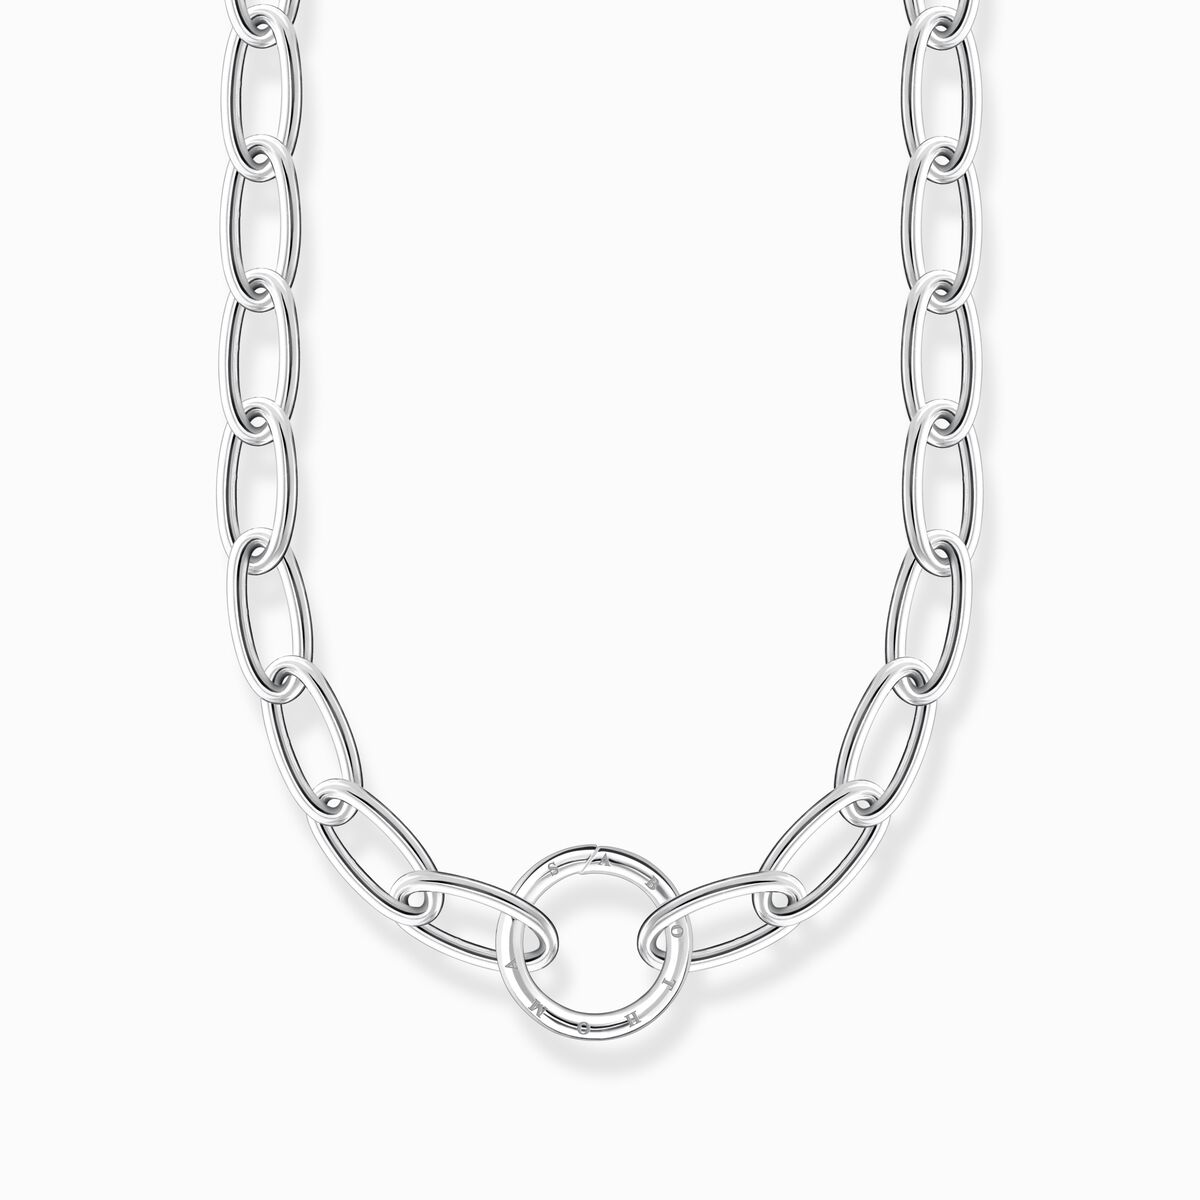 Chain necklace for women with ring clasp – THOMAS SABO